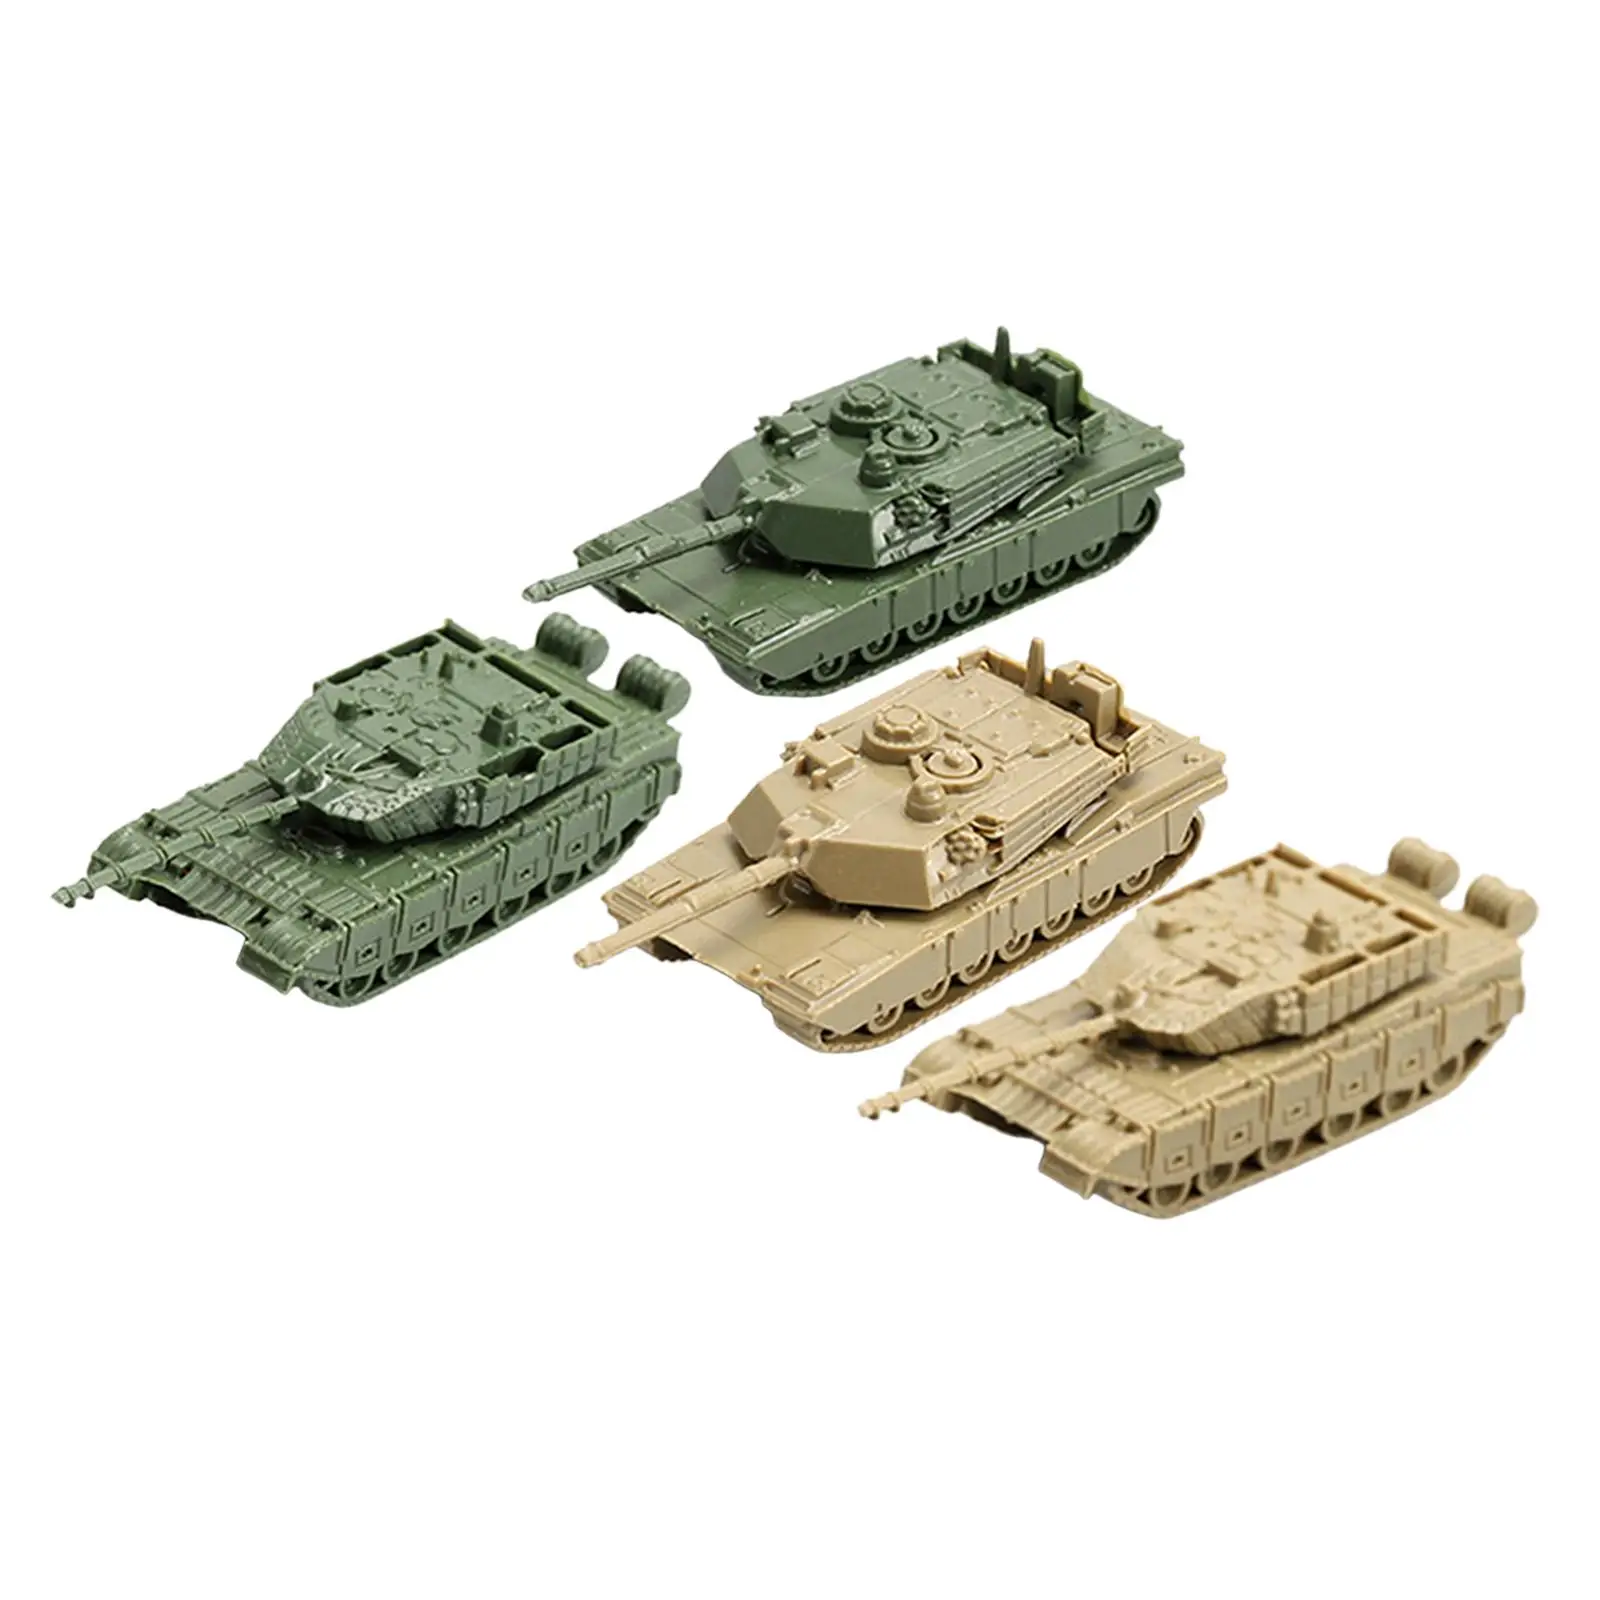 1/144 Tank Model Decorative Gifts Toy Party Favors Building Kits Paper Craft Durable 3D Puzzle for Beginners Boy and Girl